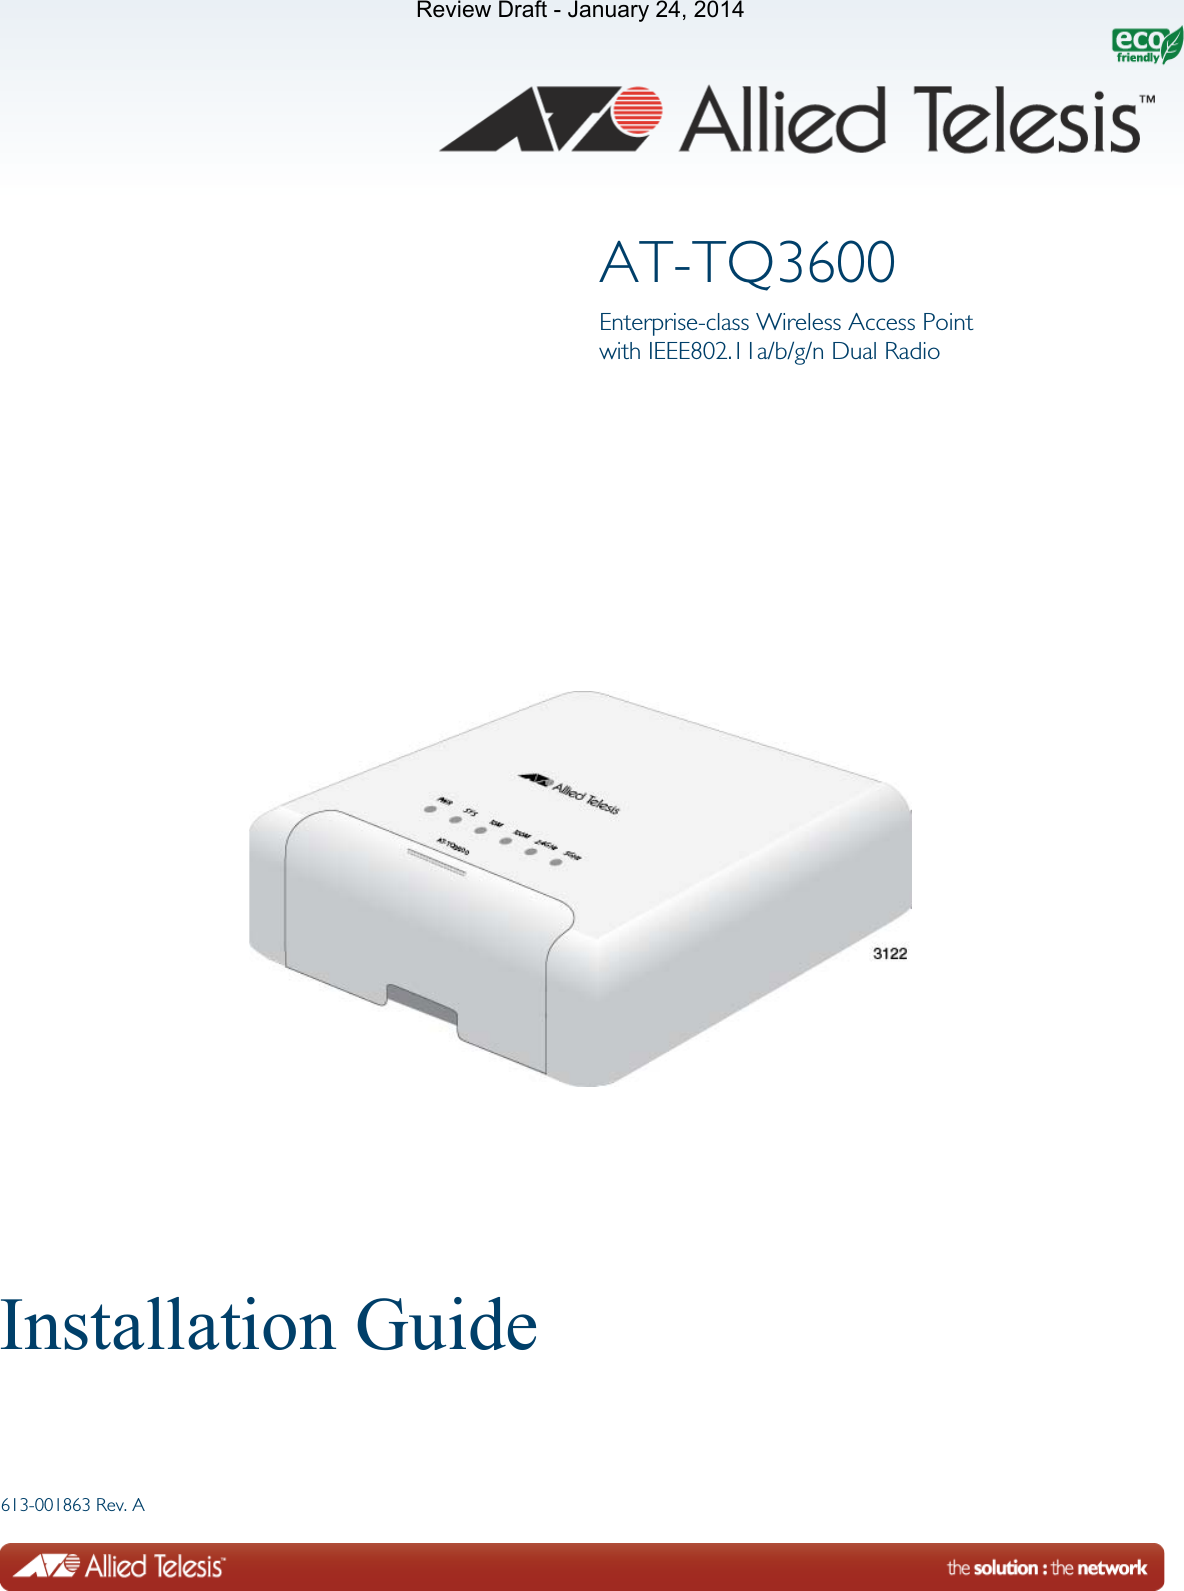 613-001863 Rev. AAT-TQ3600Enterprise-class Wireless Access Pointwith IEEE802.11a/b/g/n Dual RadioInstallation GuideReview Draft - January 24, 2014